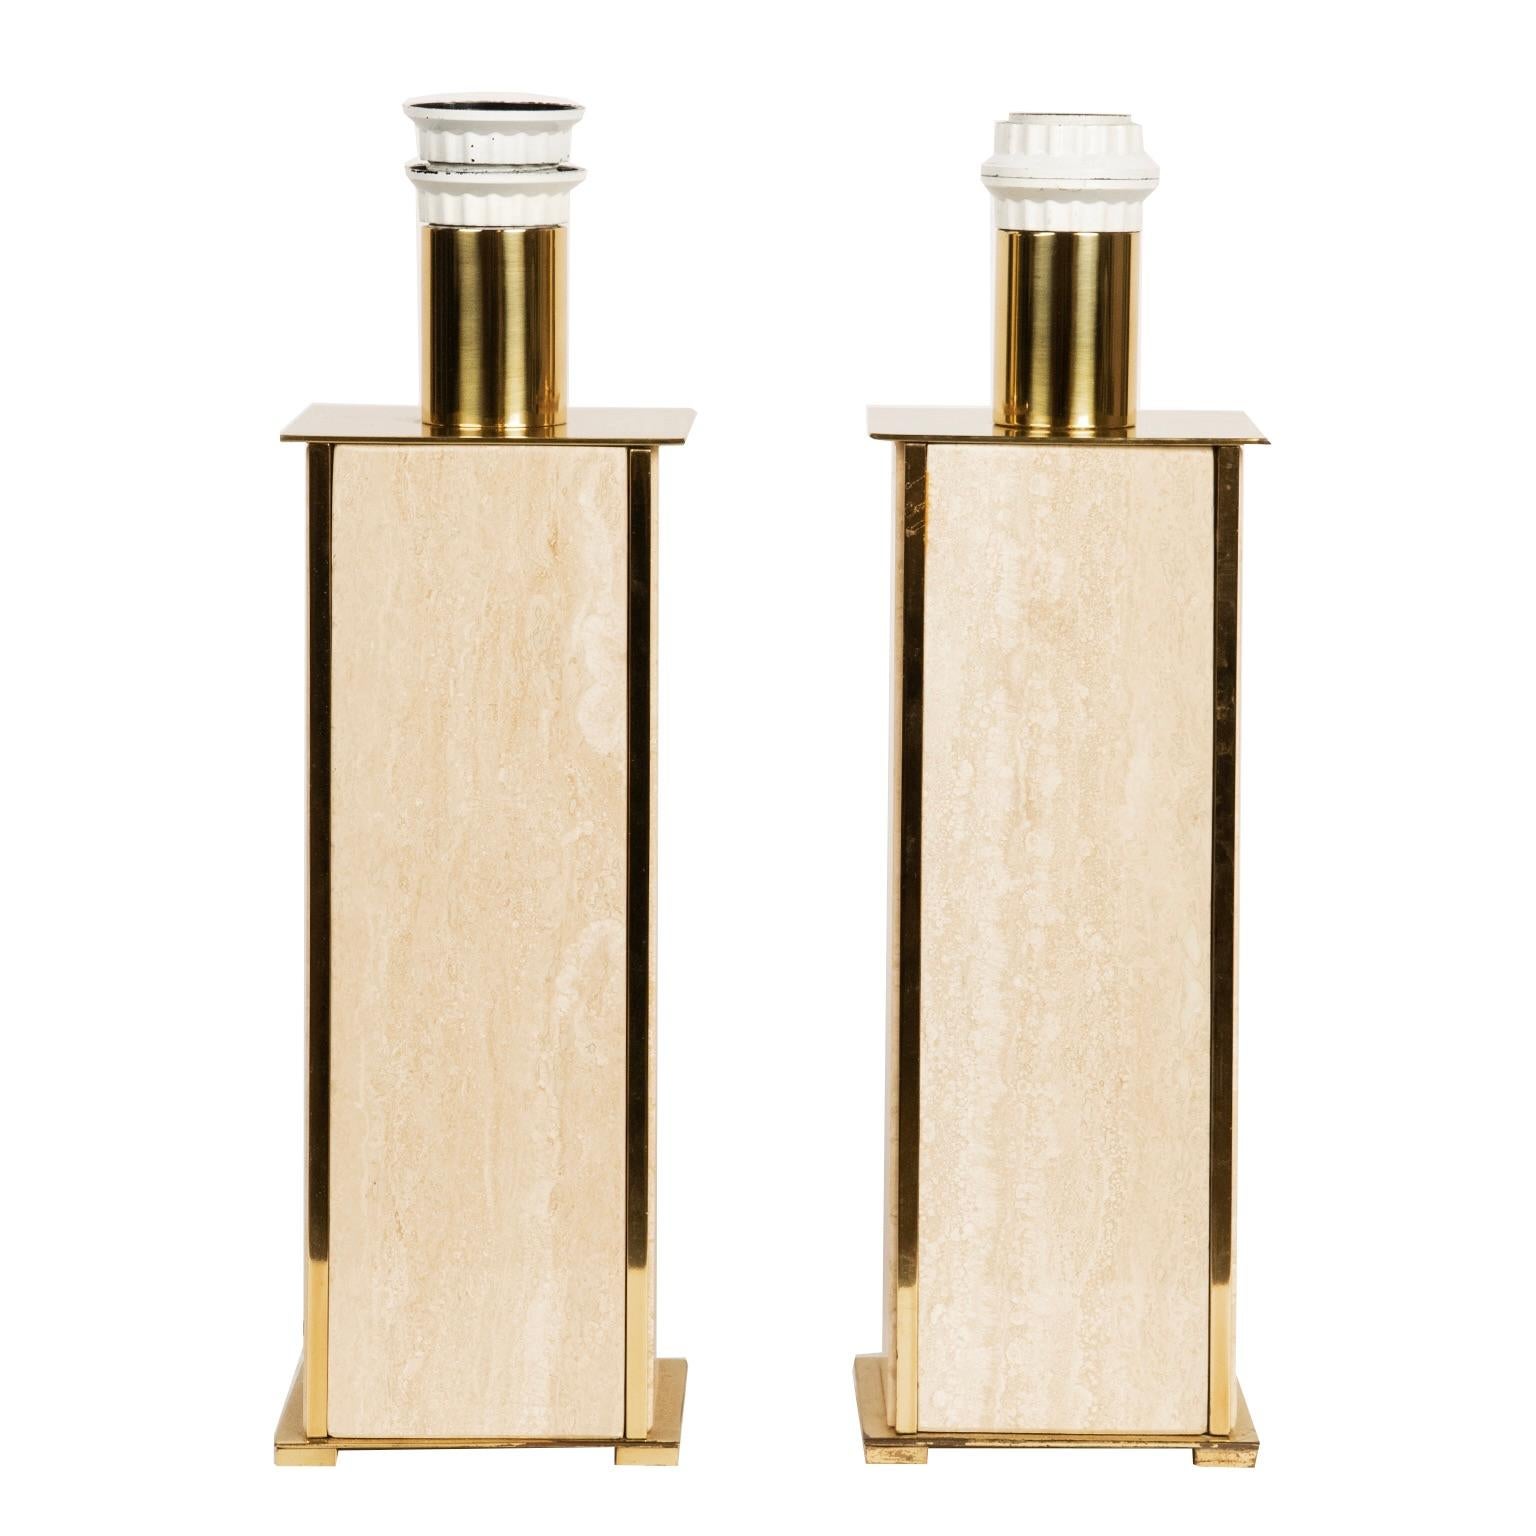 This important and handsome pair of weighty travertine and brass lamps come with off white linen rectangular shades (not pictured). The travertine stone is accented with a brass top, bottom and sides.
They are wired for North America.